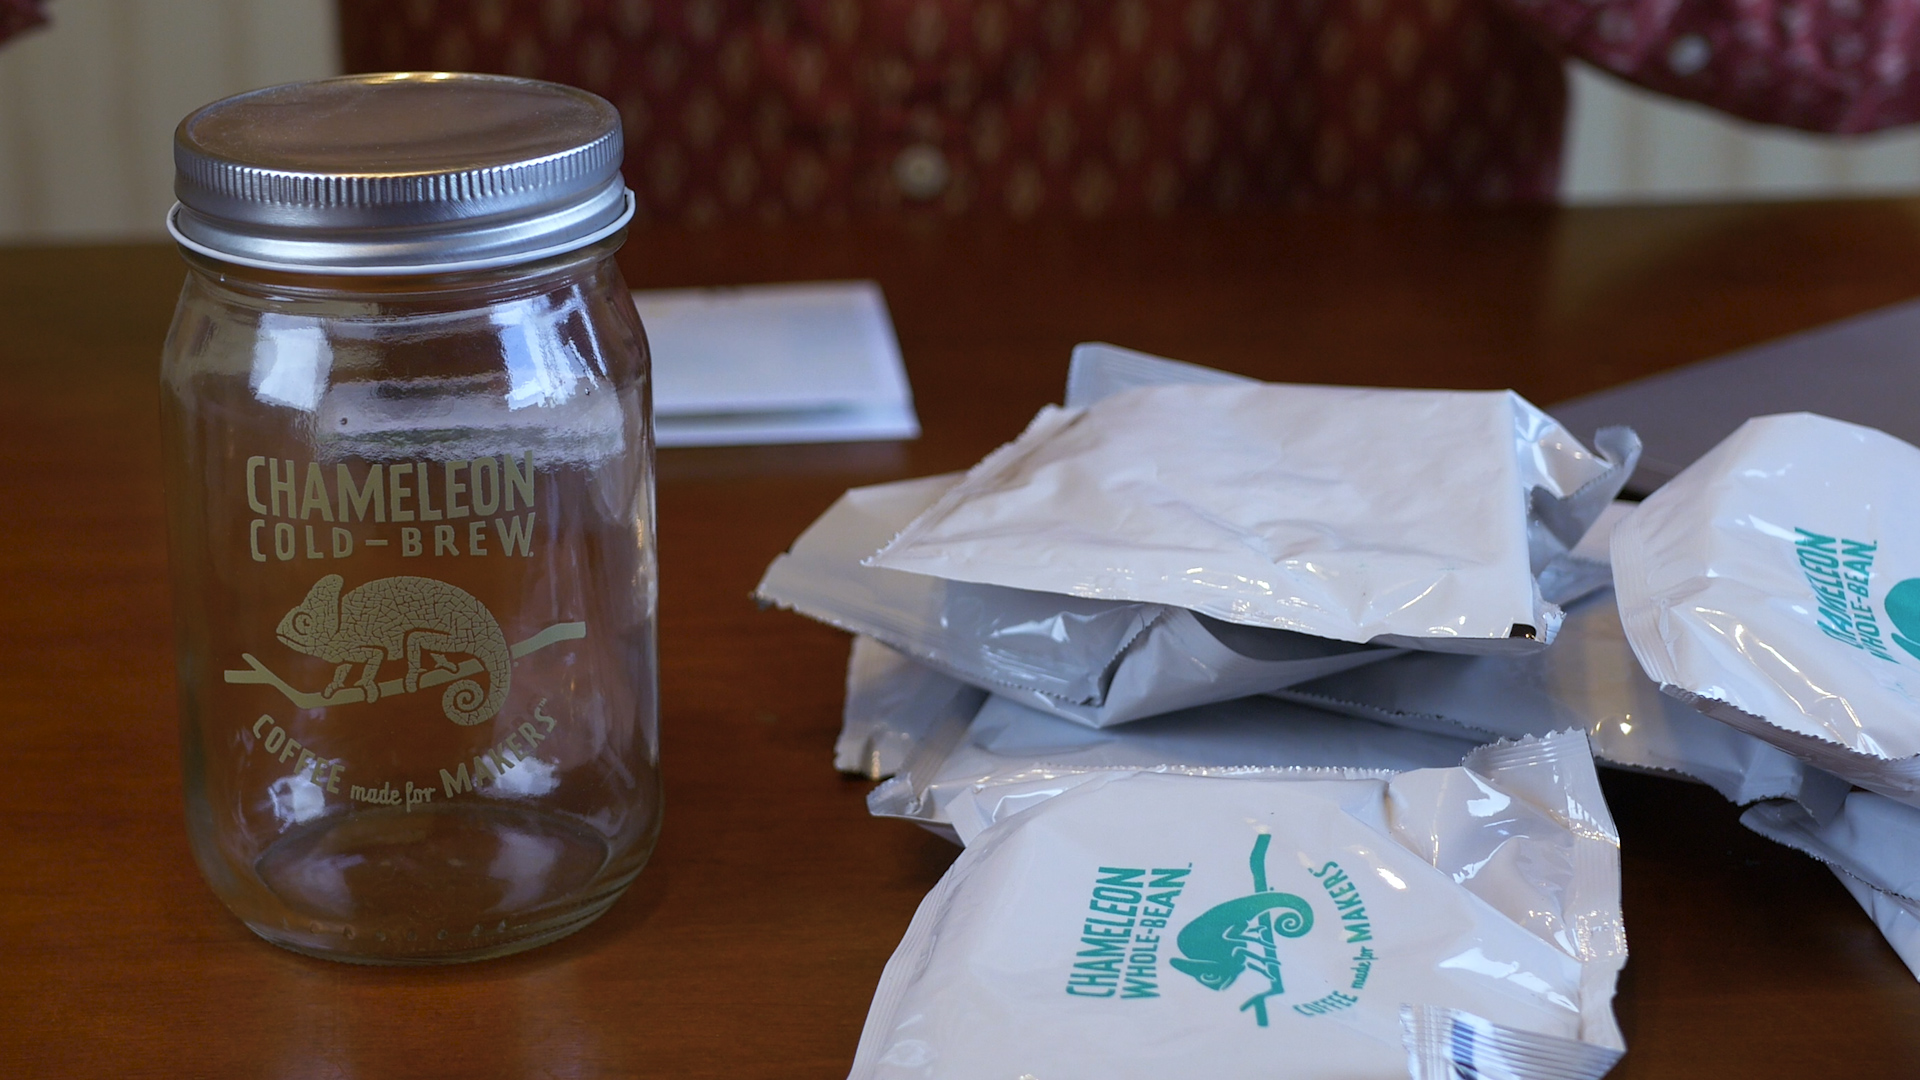 Photo of Chameleon Whole Bean coffee packet and a mason jar for brewing